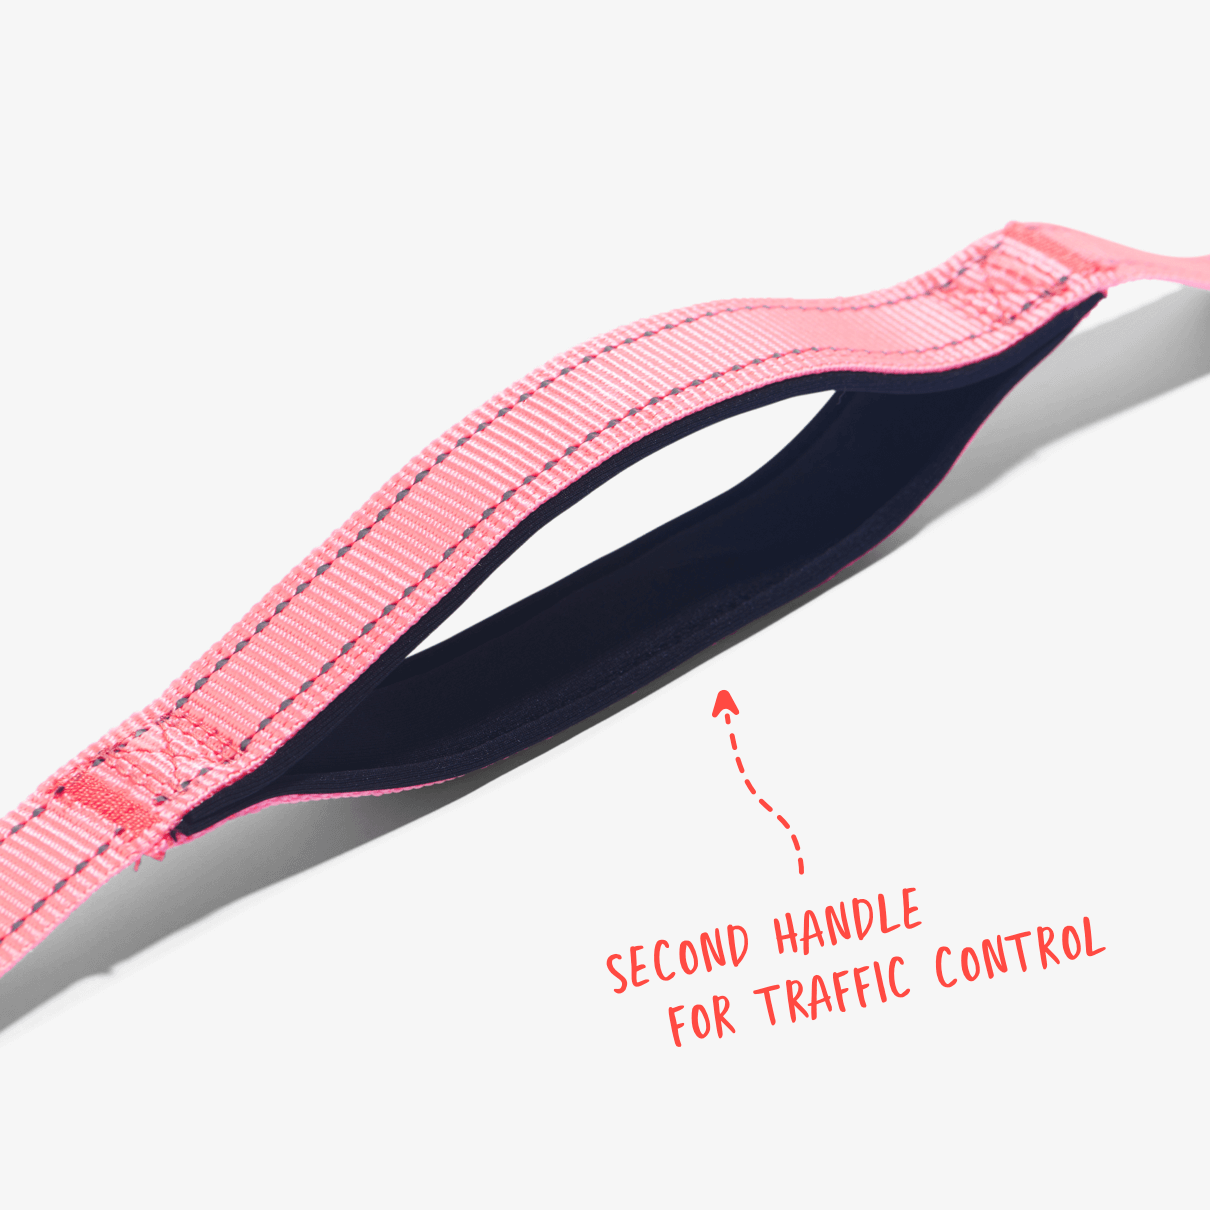 Pink total control dog leash showing second handle for traffic control